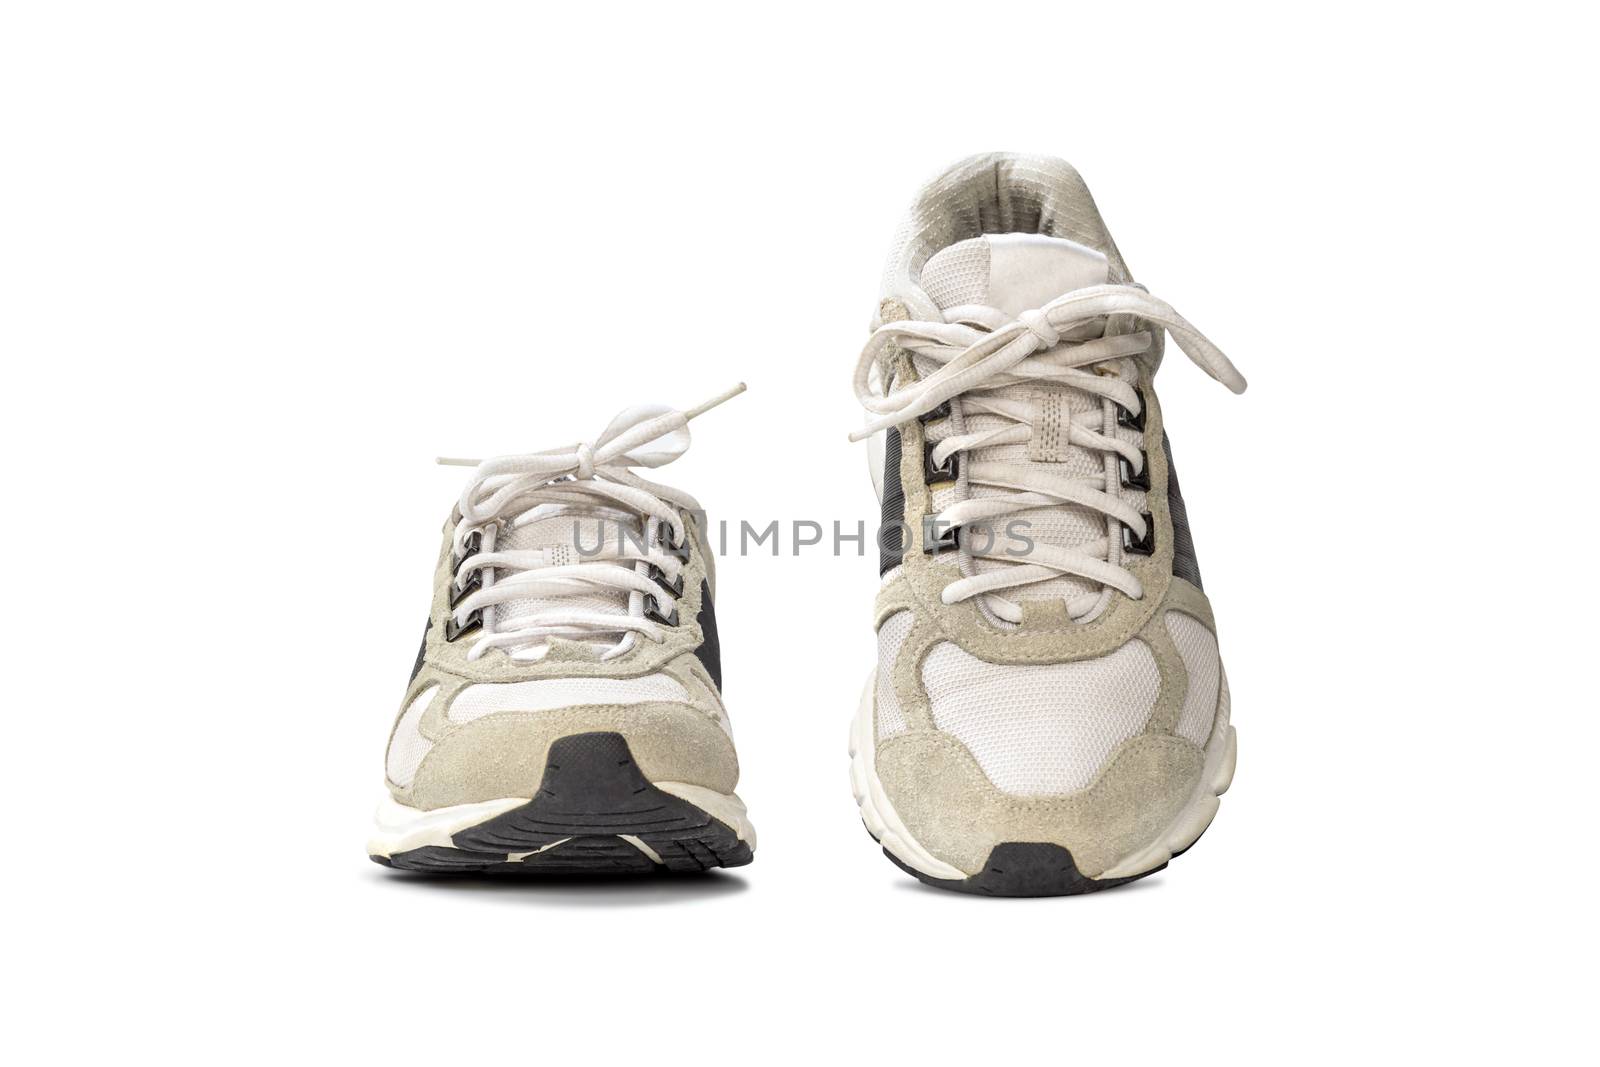 Fashion running sneaker shoes isolated on white background.